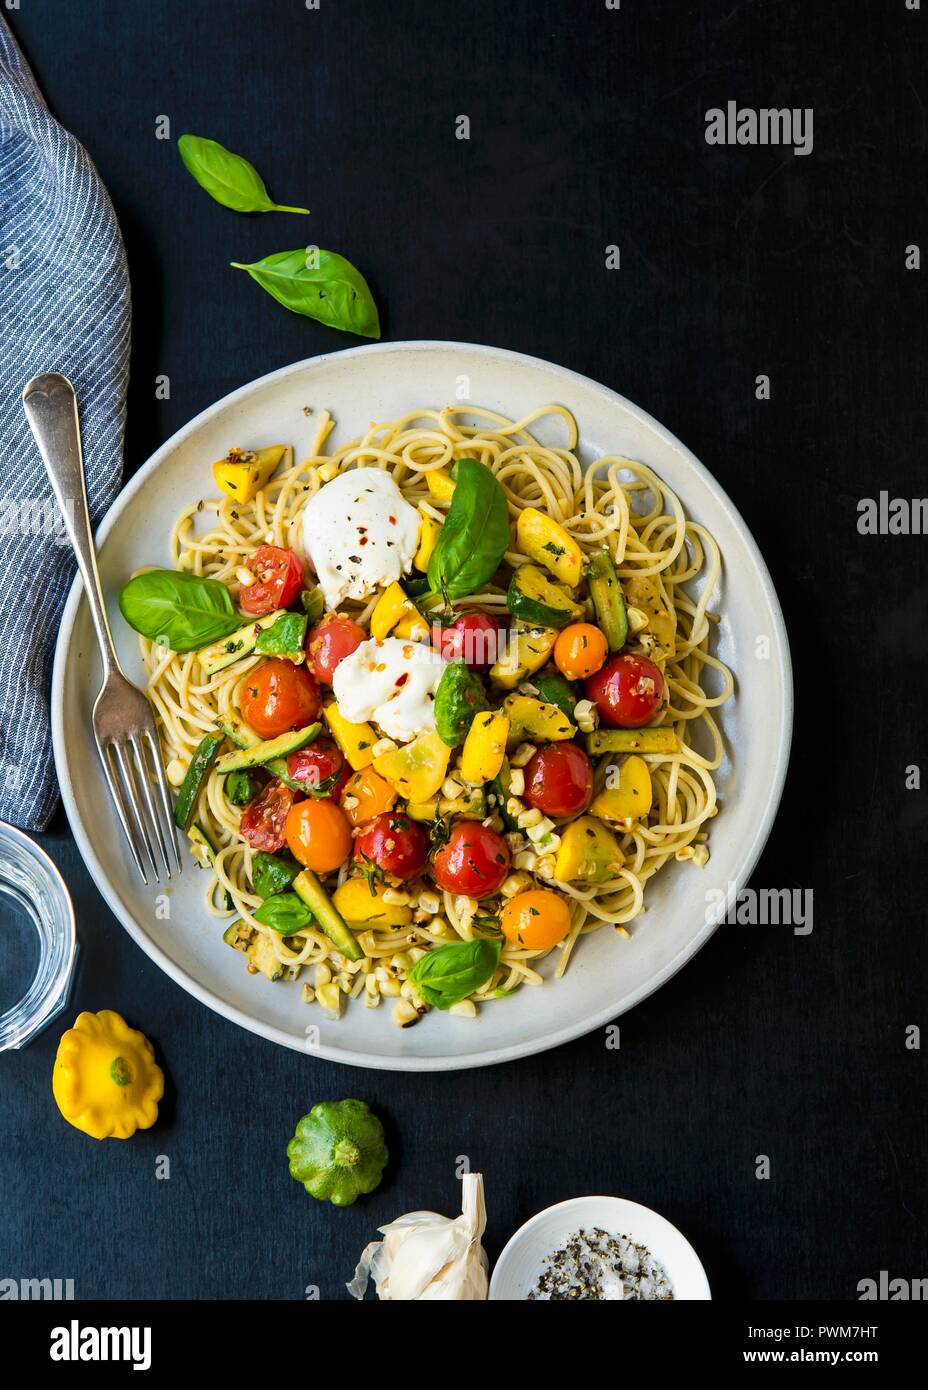 Spaghetti with anchovy paste, sautéed vegetables, burrata and basil Stock Photo